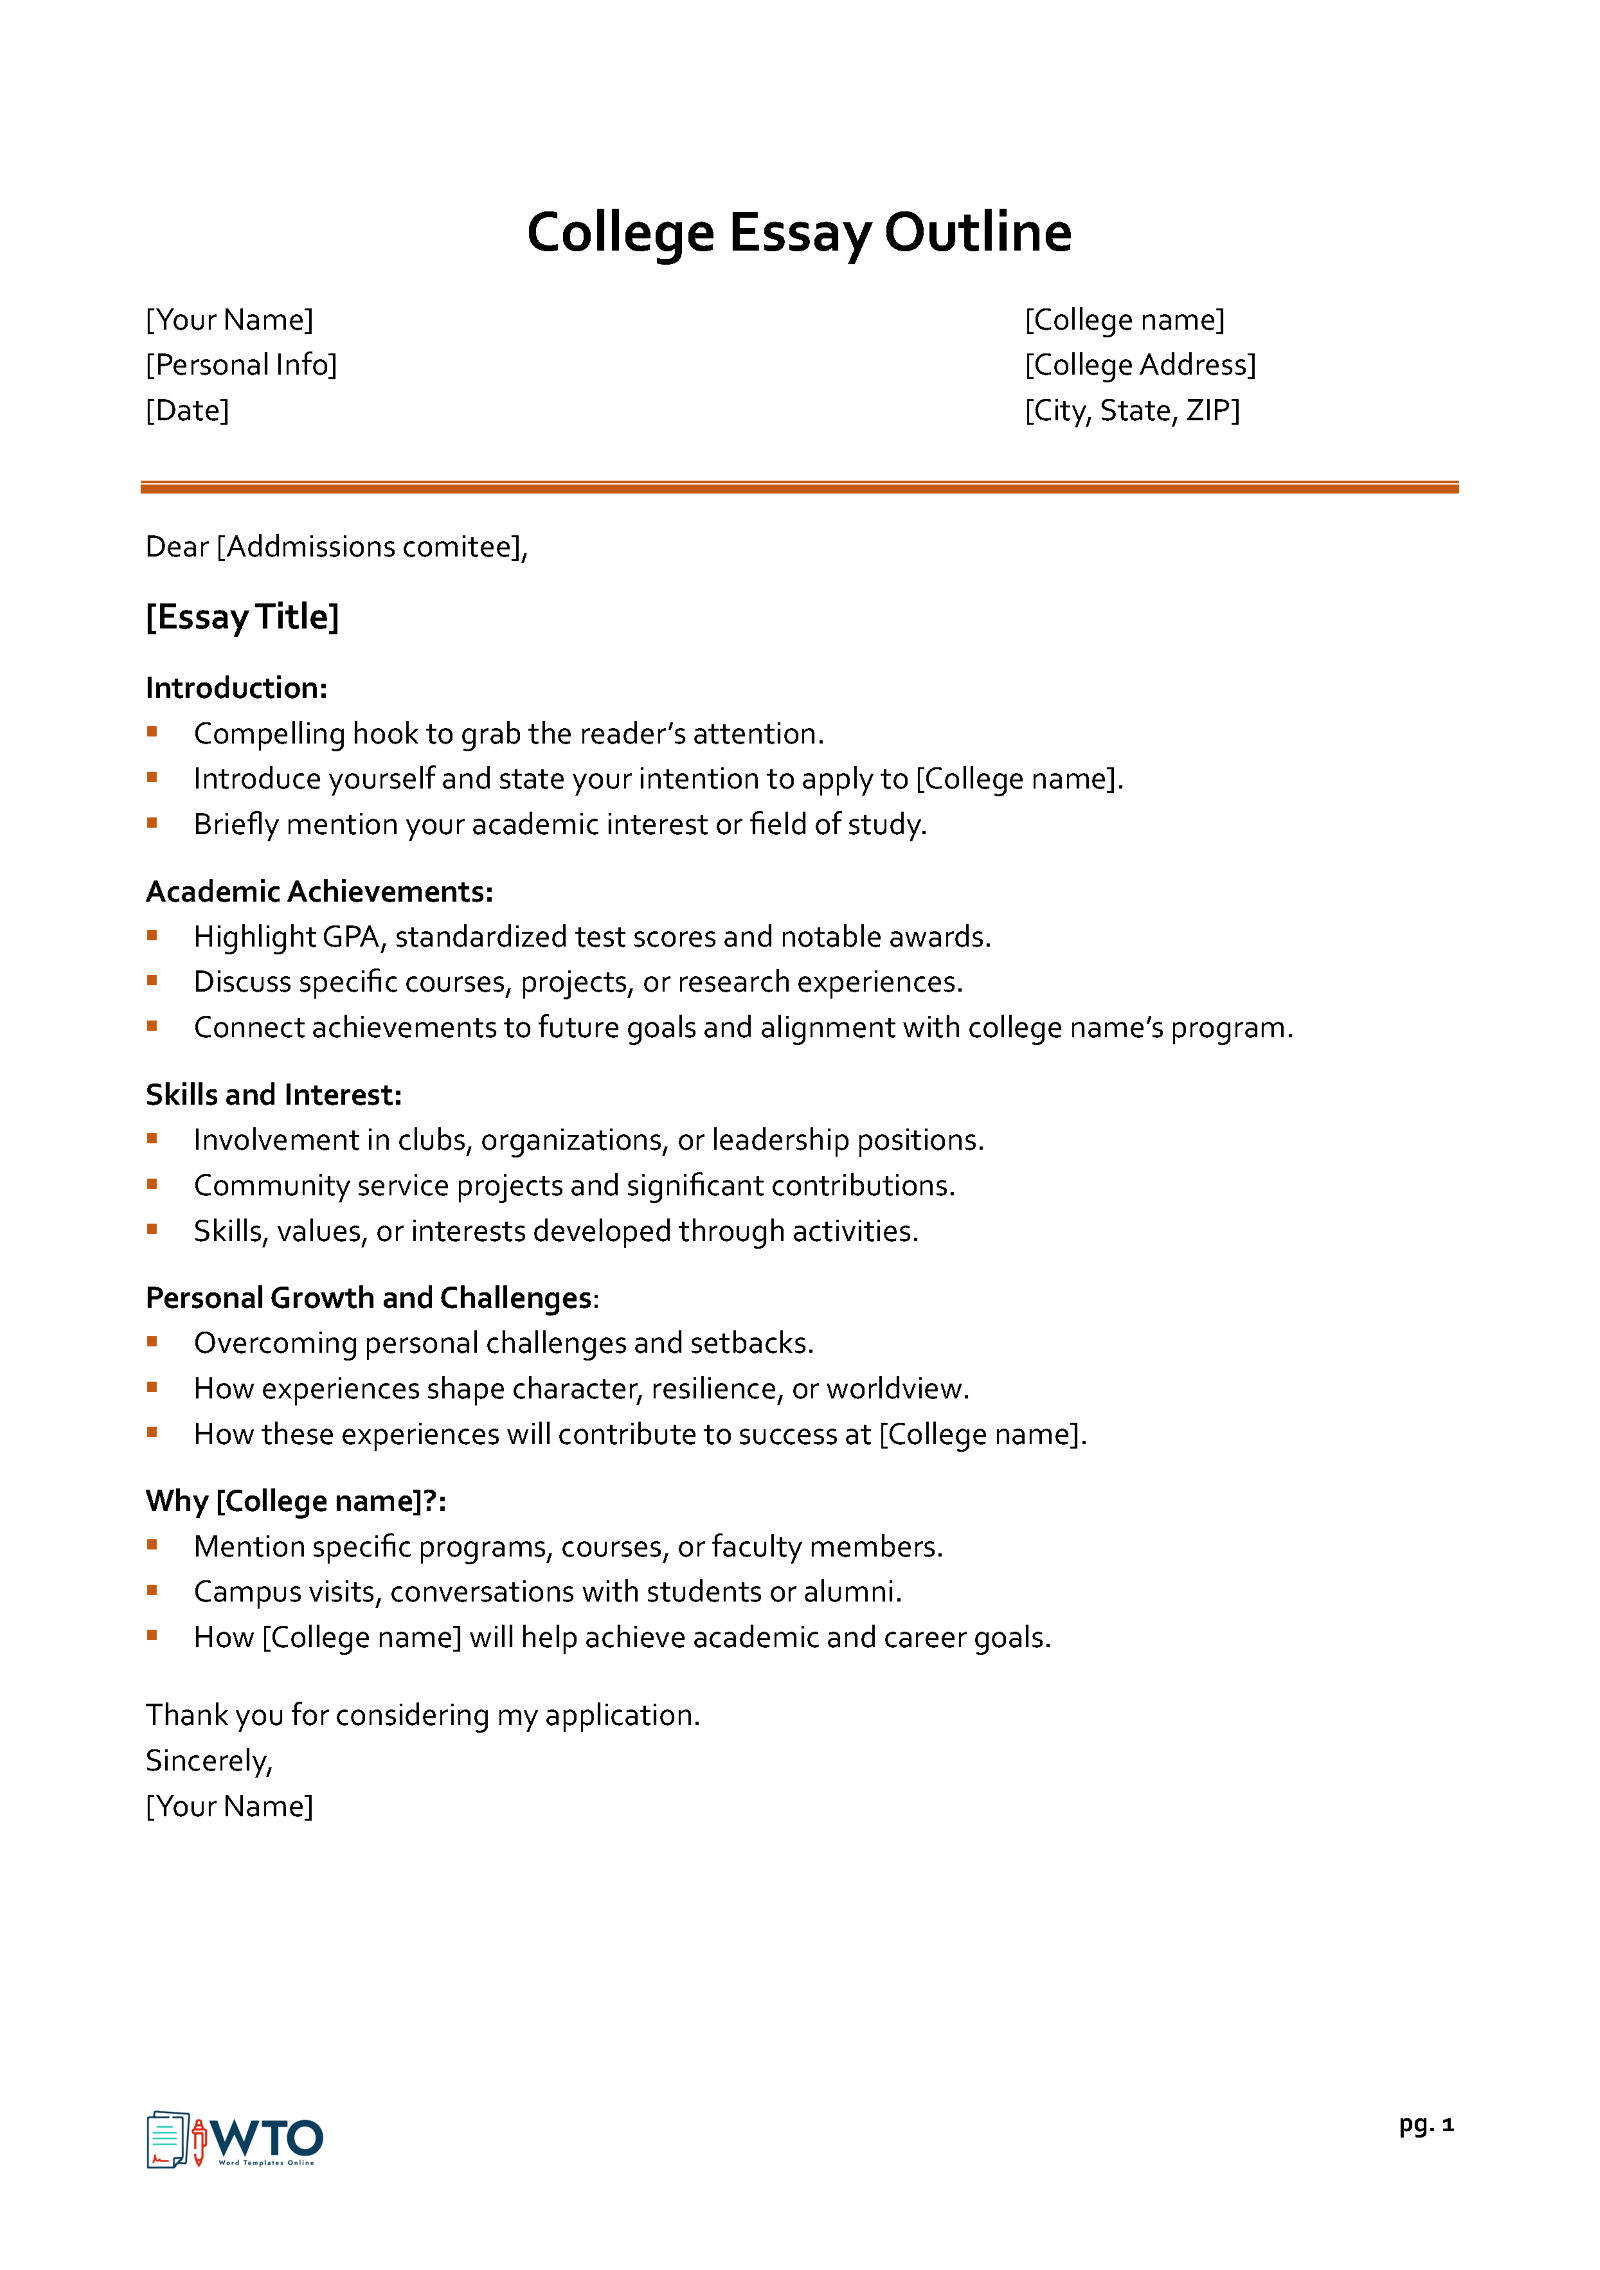 Free Downloadable College Essay Outline Template 02 for Word Document